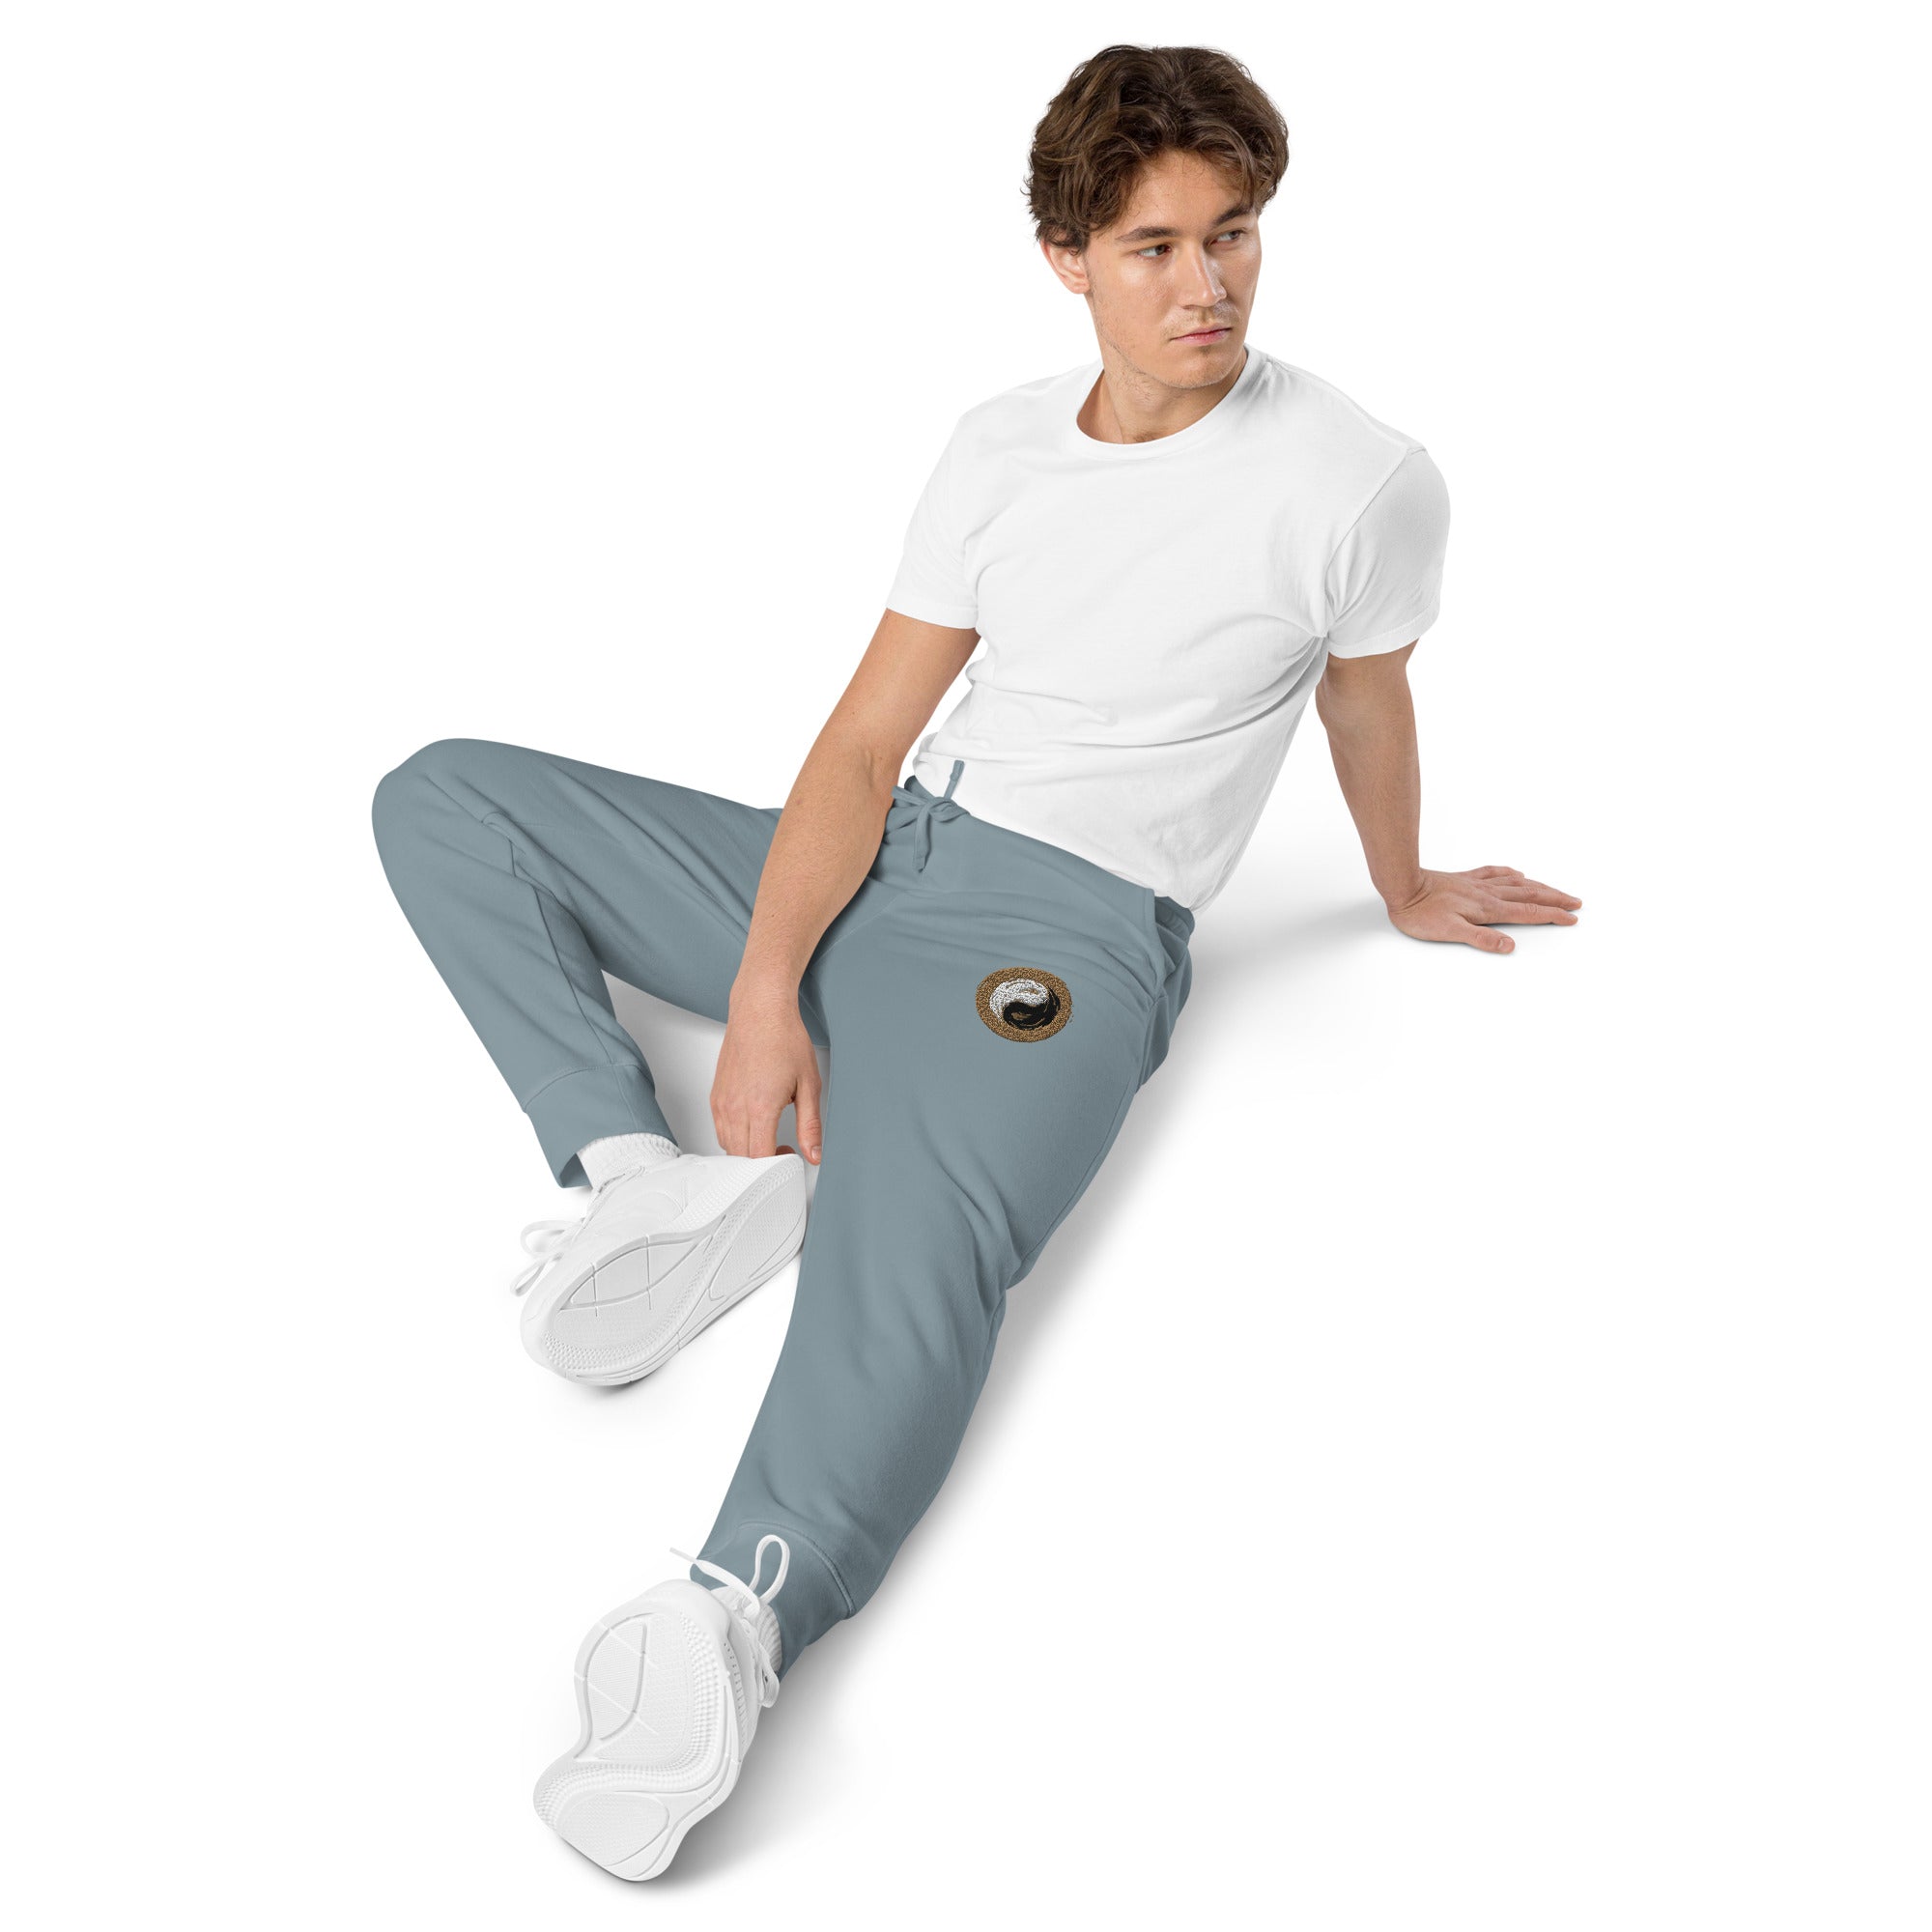 Personal Hour Style - Unisex Pigment-dyed Yoga Sweatpants - Personal Hour for Yoga and Meditations 